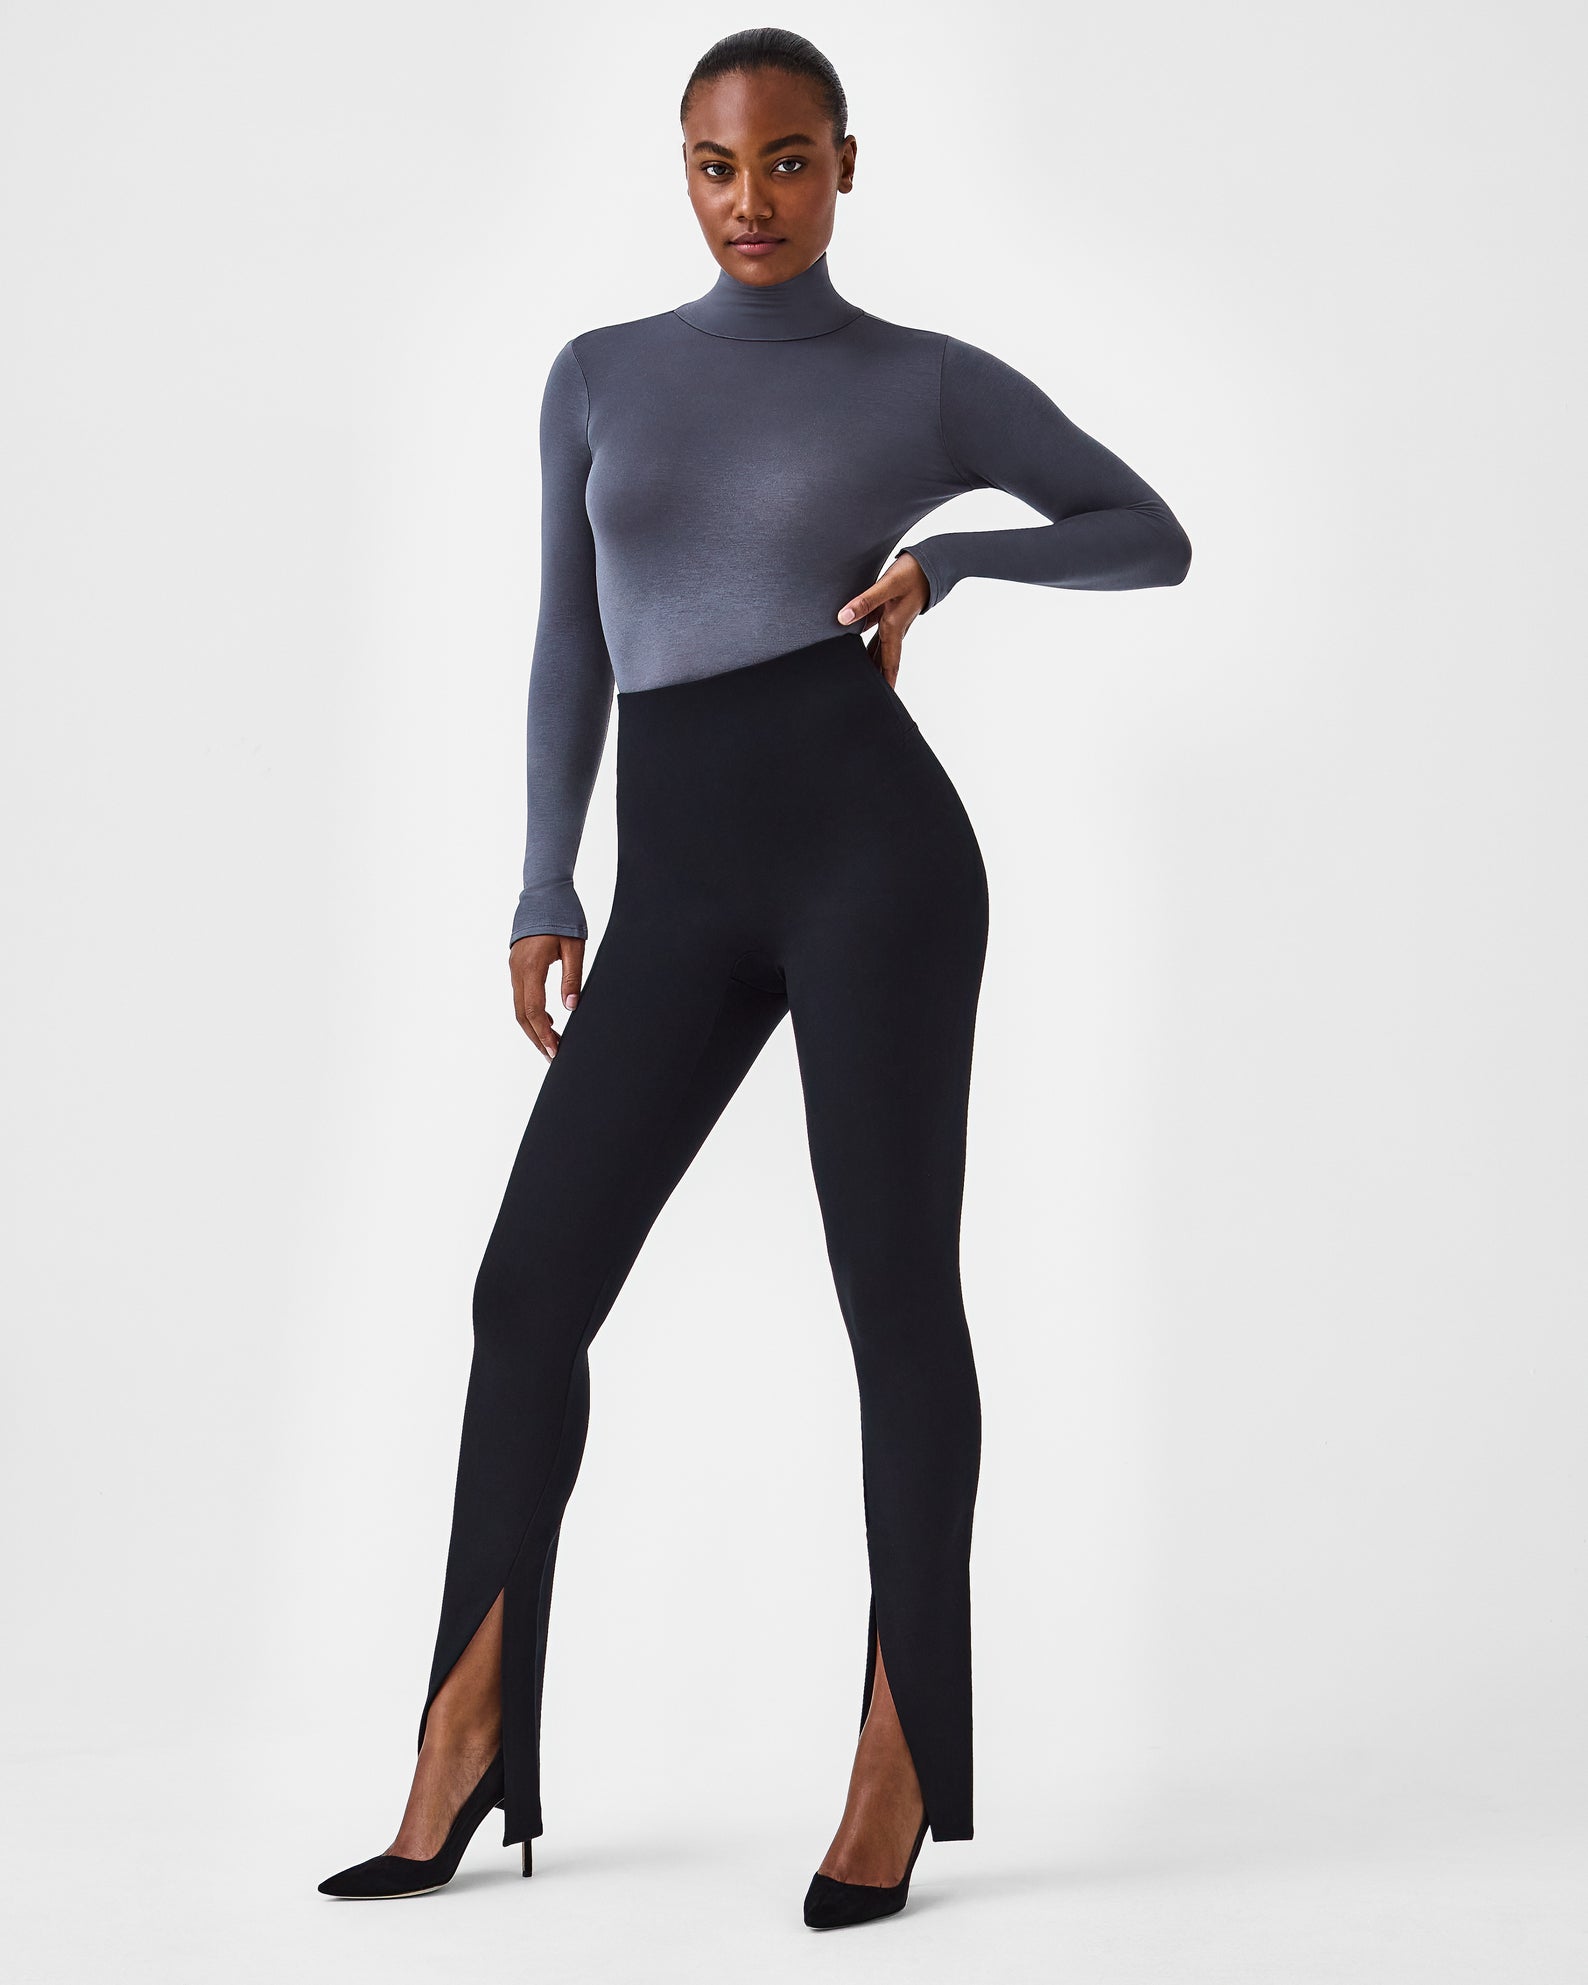 Spanx The Perfect Front Slit Skinny Pants - PapillonStyles